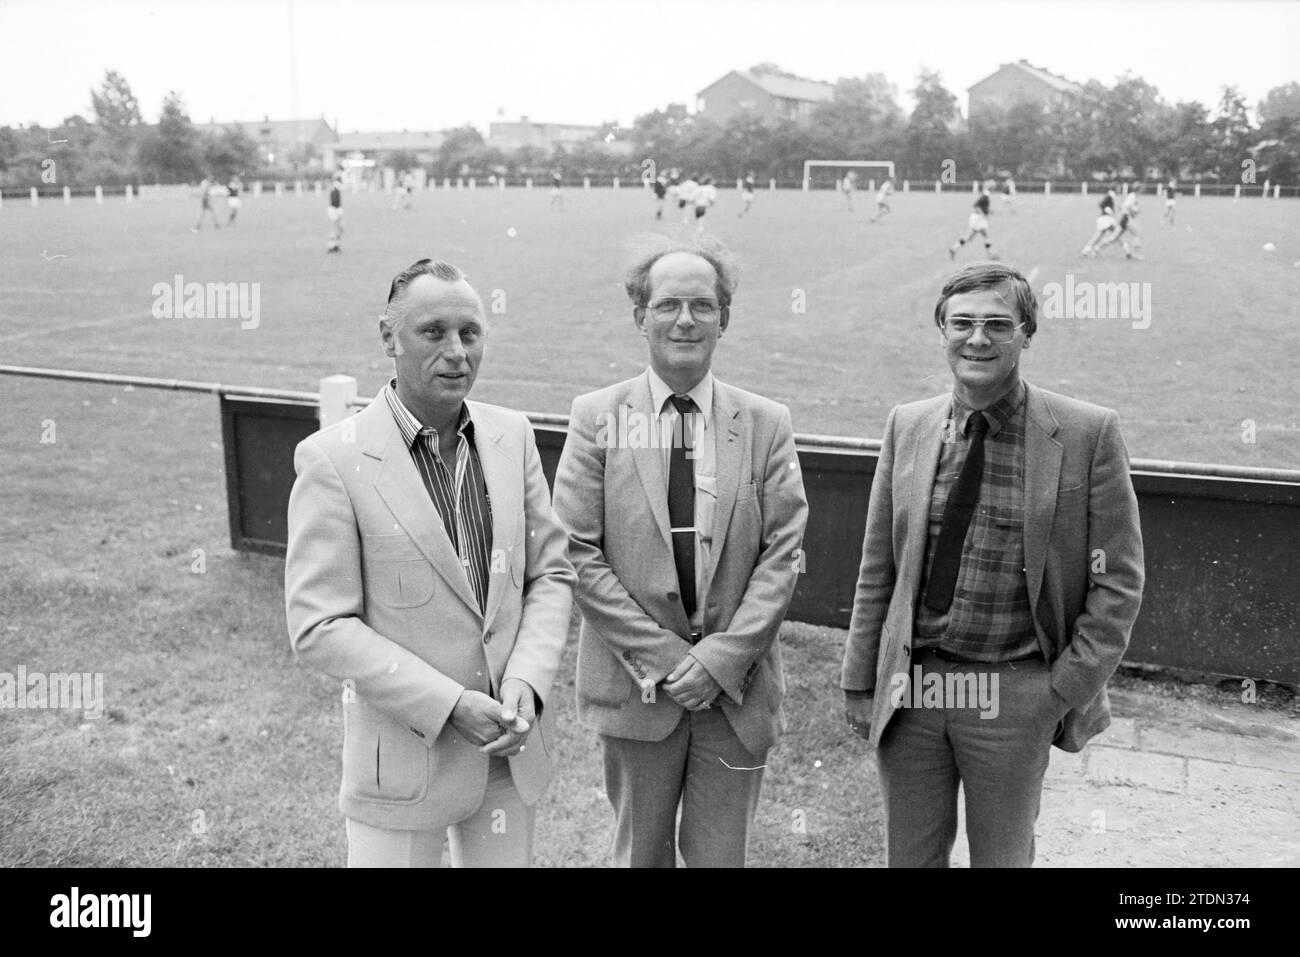 Board of interests association amateurs, mr. Sibrandi, mr. Gregoire and mr. Van Ling, Football people and trainers, 20-08-1981, Whizgle News from the Past, Tailored for the Future. Explore historical narratives, Dutch The Netherlands agency image with a modern perspective, bridging the gap between yesterday's events and tomorrow's insights. A timeless journey shaping the stories that shape our future Stock Photo